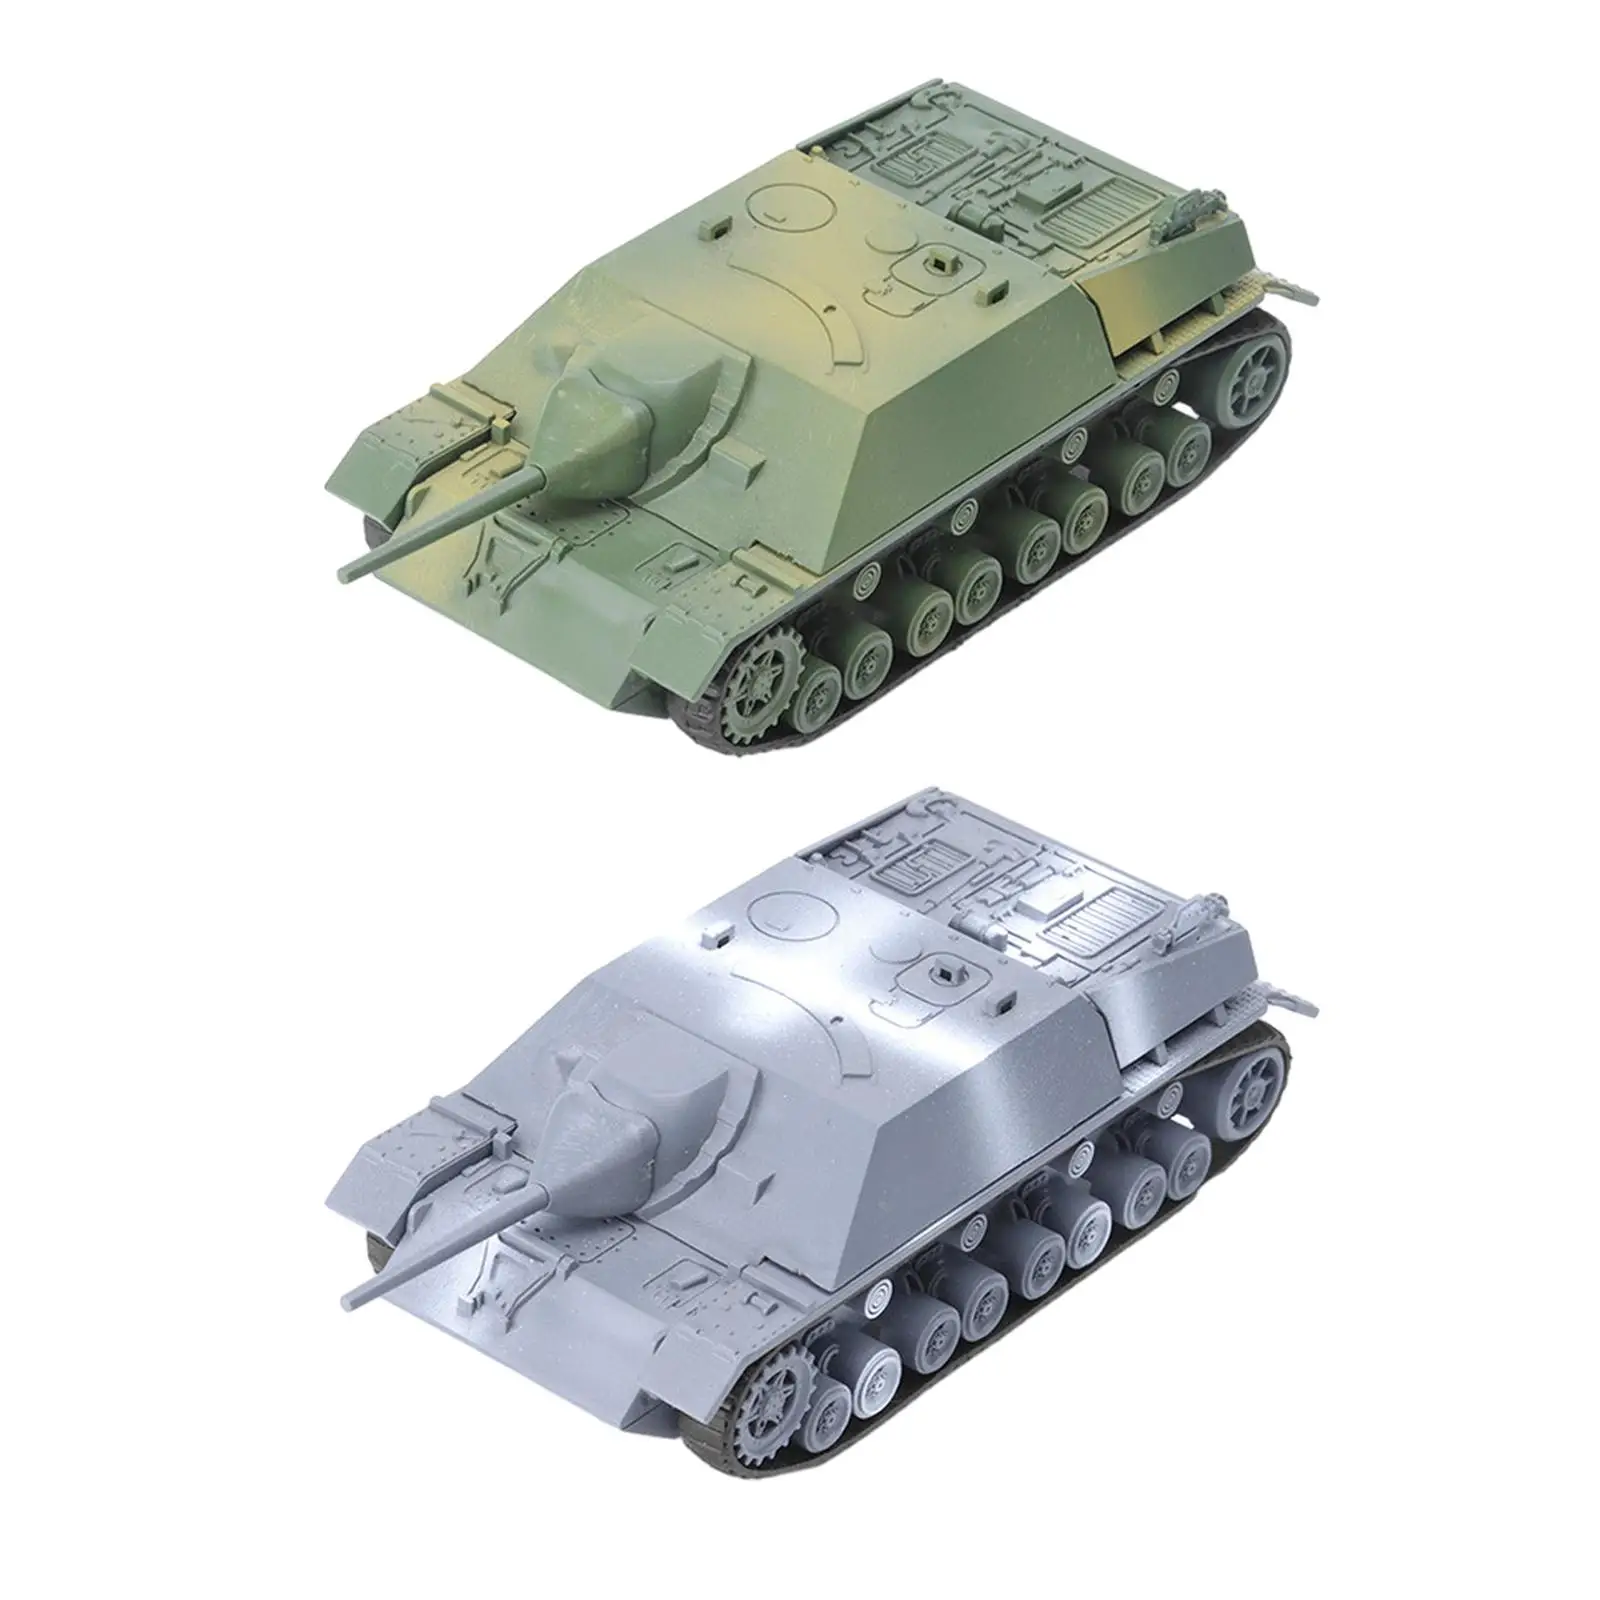 1/72 Scale Armored Tank Model Self Assembled Building Model Armored Vehicle for Party Favors Kids Gift Children Collectibles